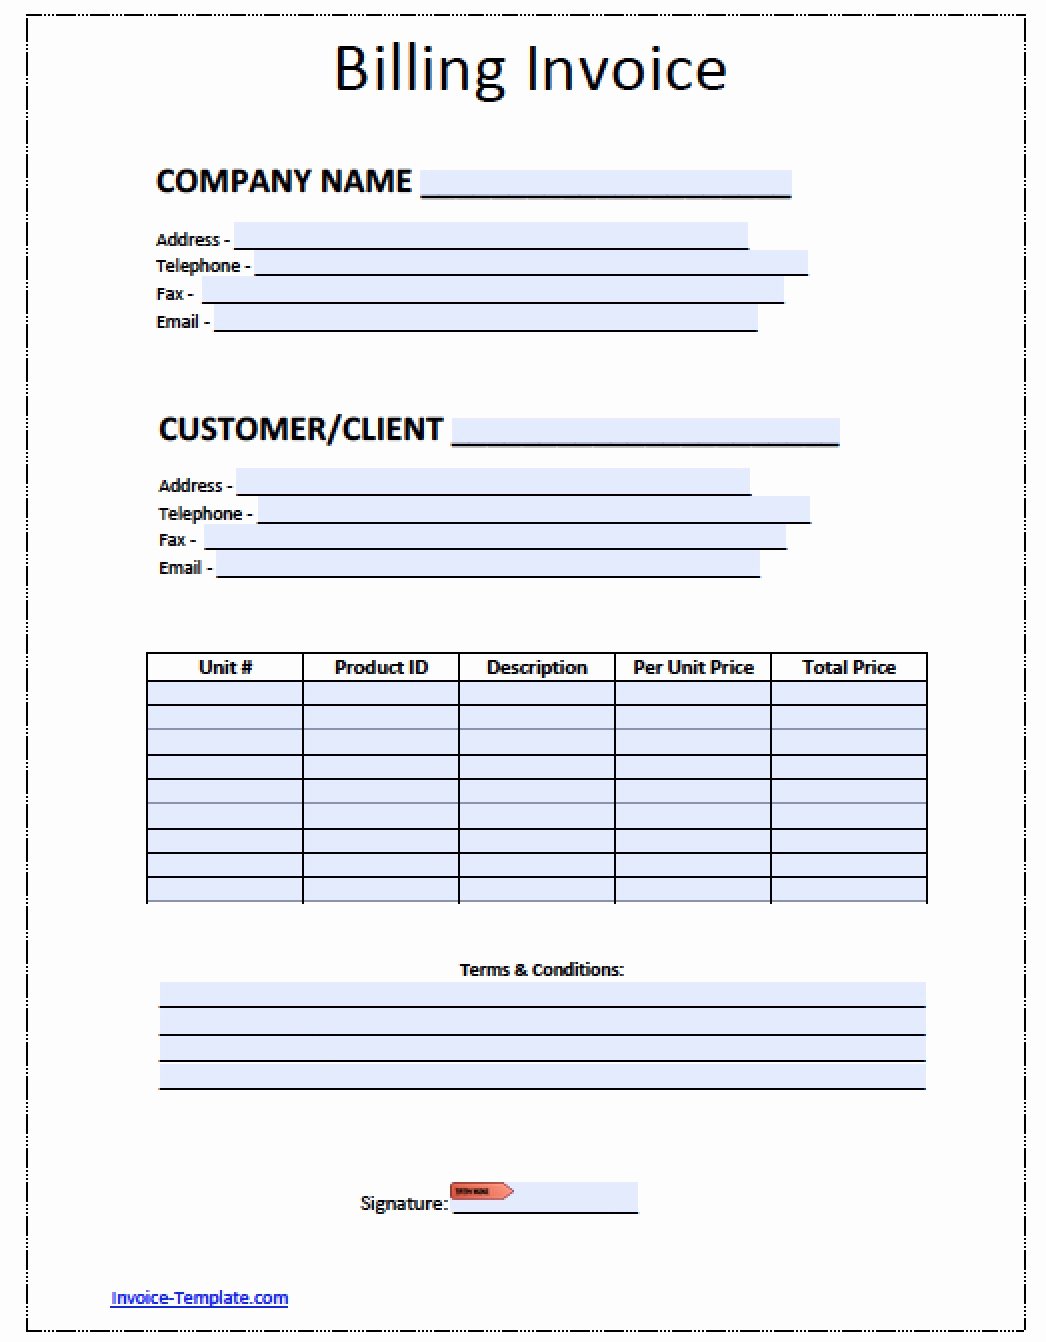 Billing Invoice Template Download Free Blank Invoice